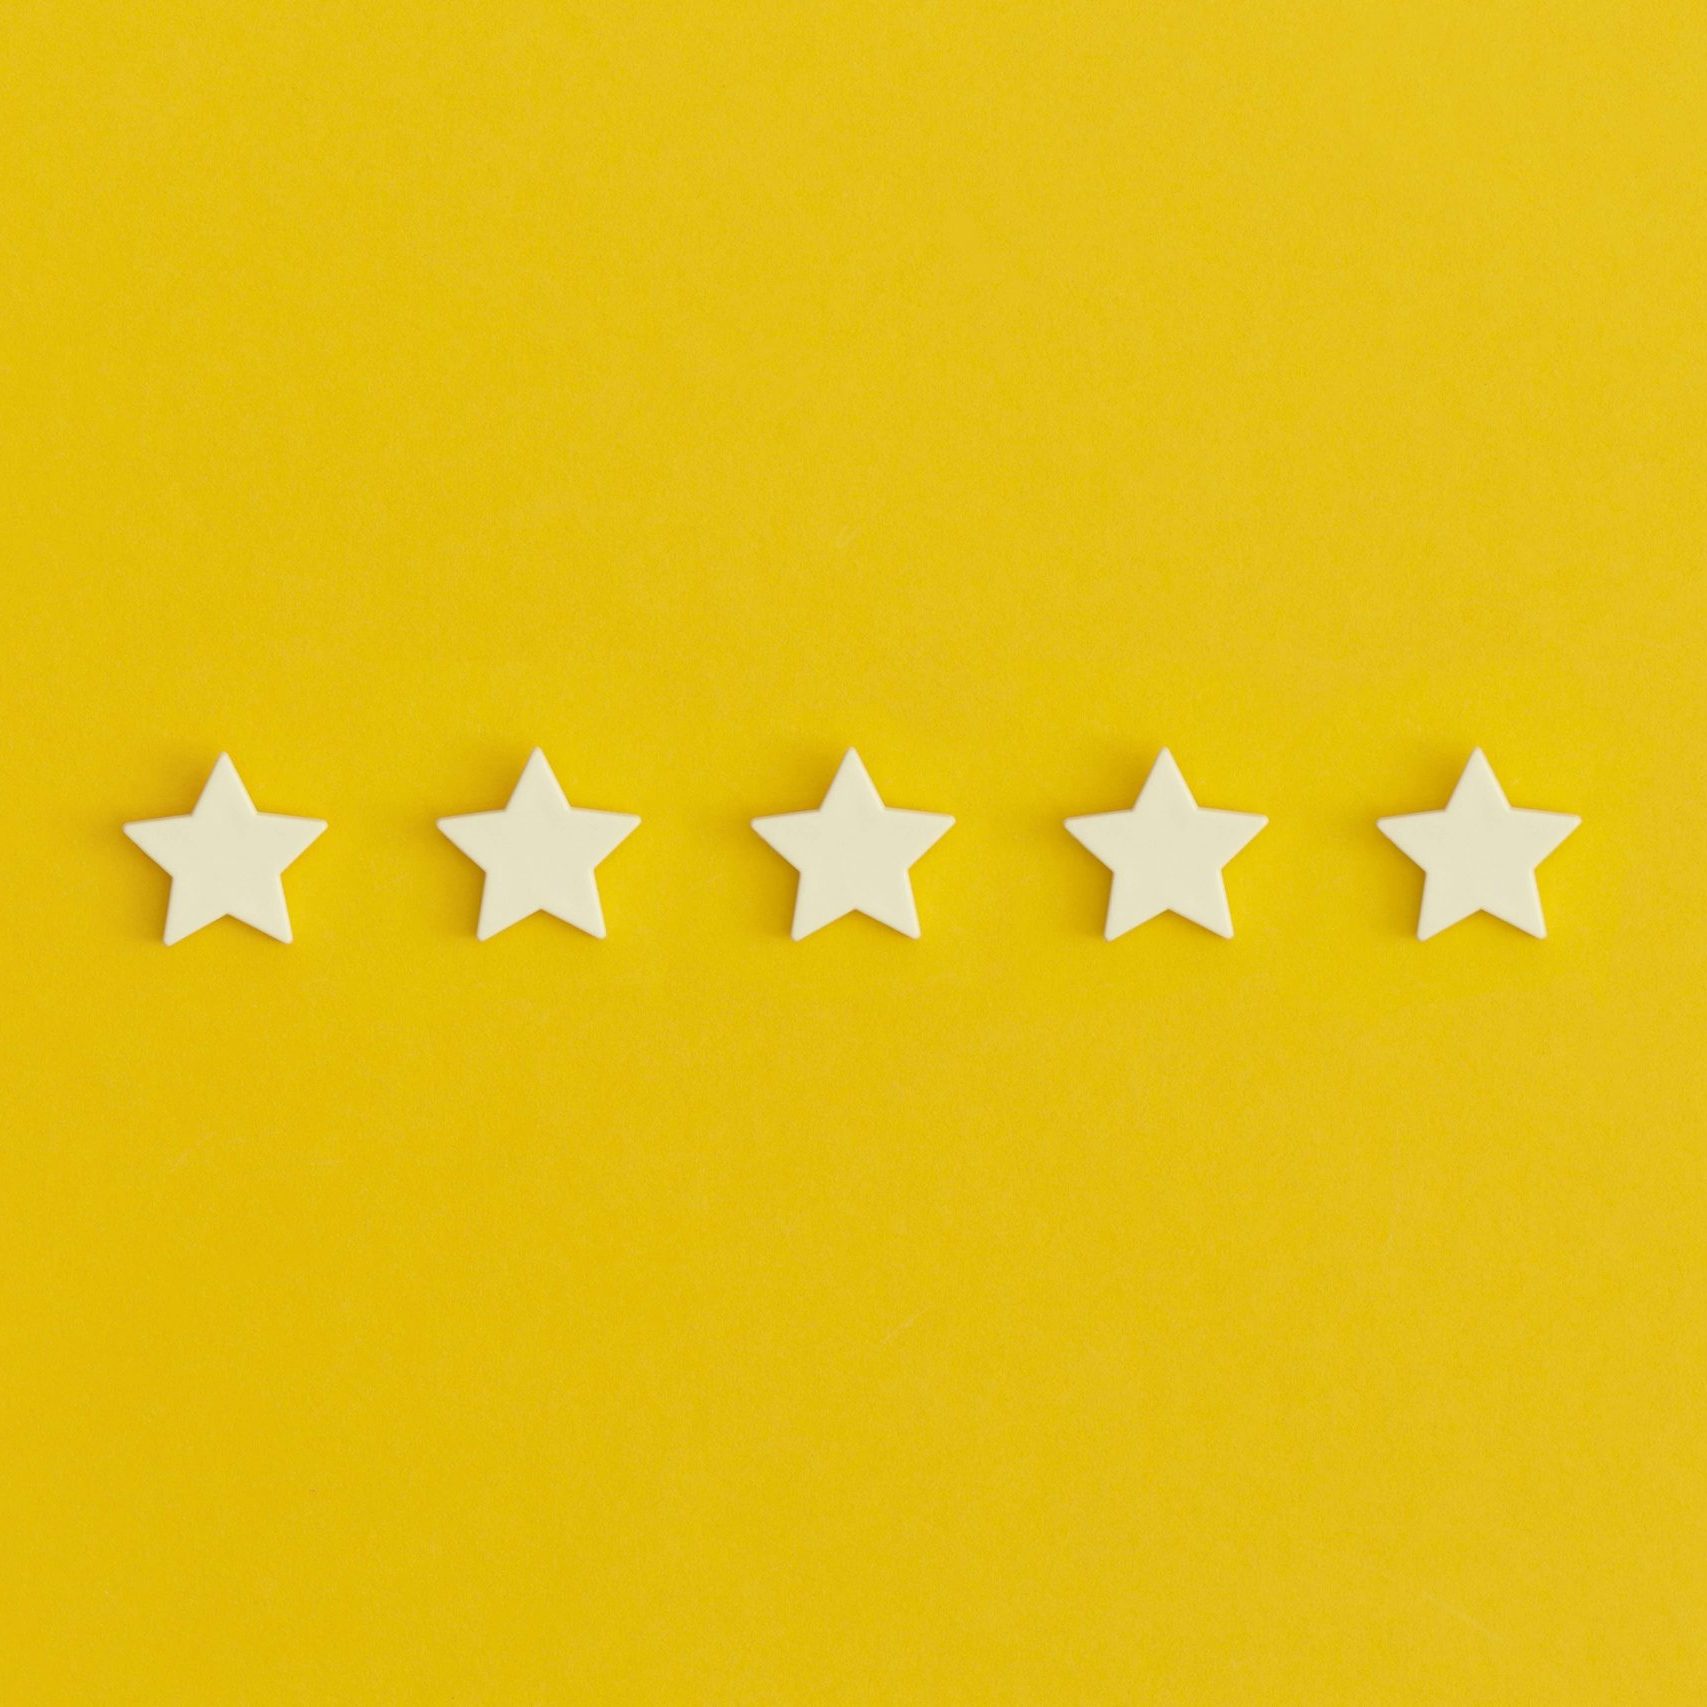 Five 5 stars, best excellent services rating on yellow background.